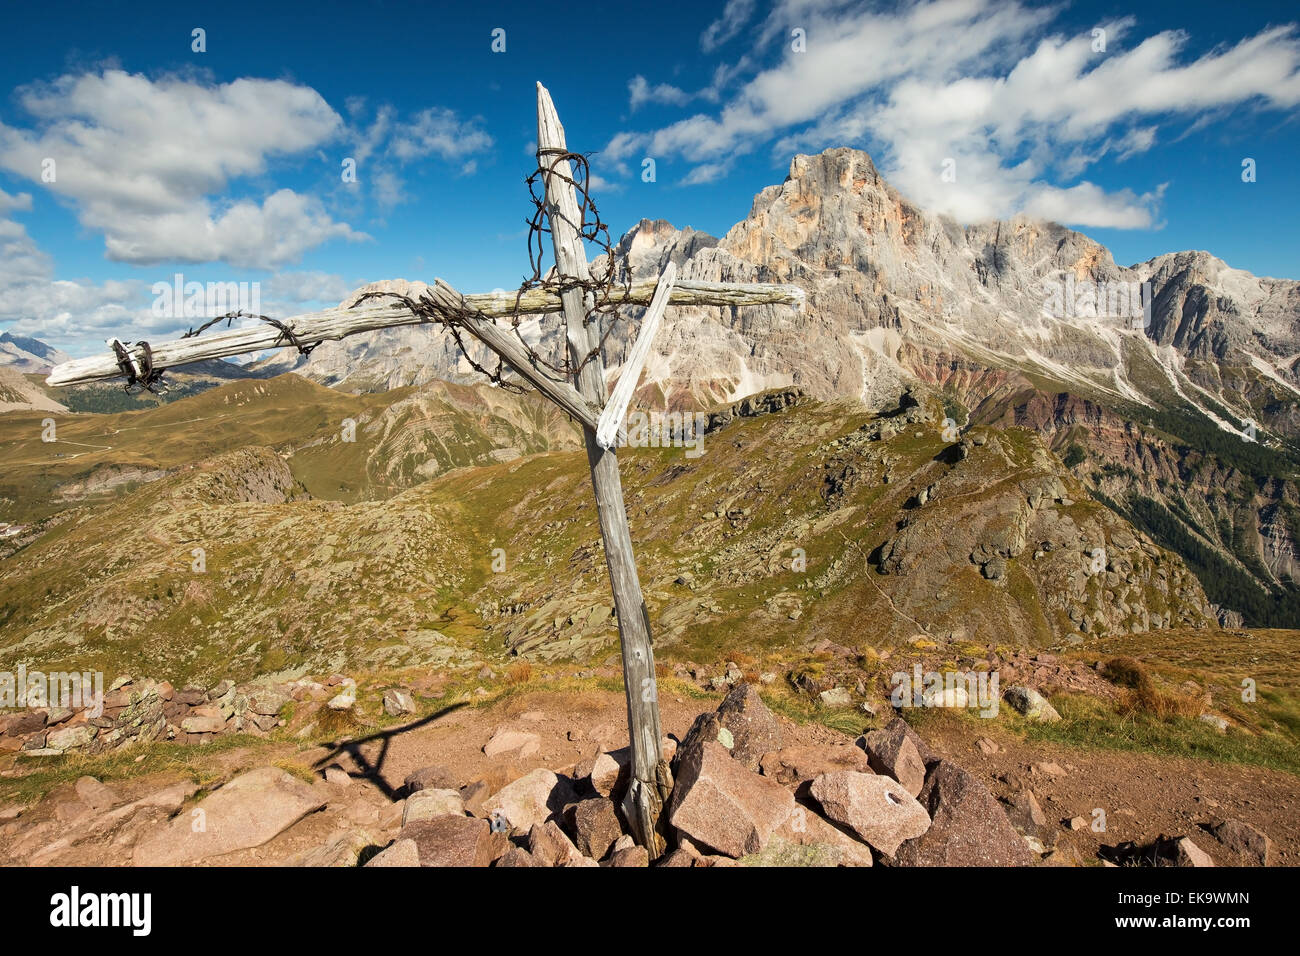 Cavallazza mountain (the Lagorai massif). On top the cross of the First World War. In the background the Pale di San Martino massif. Italy. Europe. Stock Photo